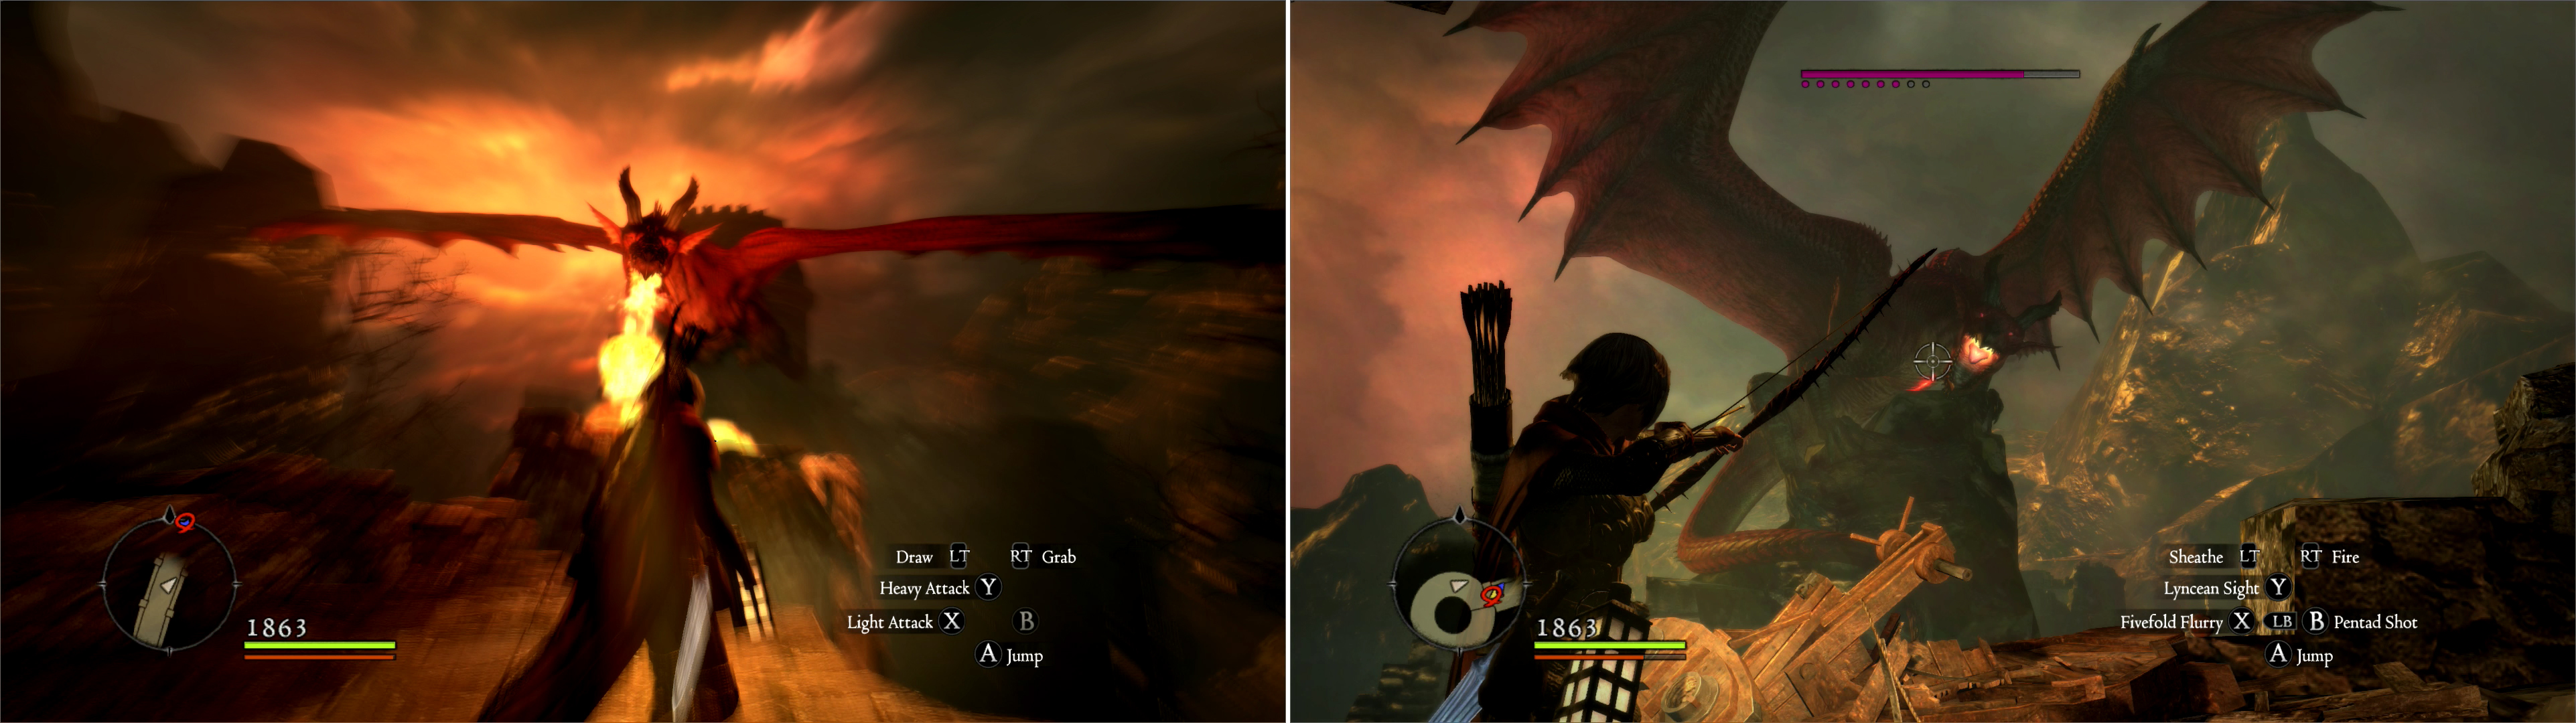 Move across the collapsing bridge as the Dragon makes fiery fly-by attacks (left). If you’ve got a ranged weapon, you can drive the Dragon off its roost (right).